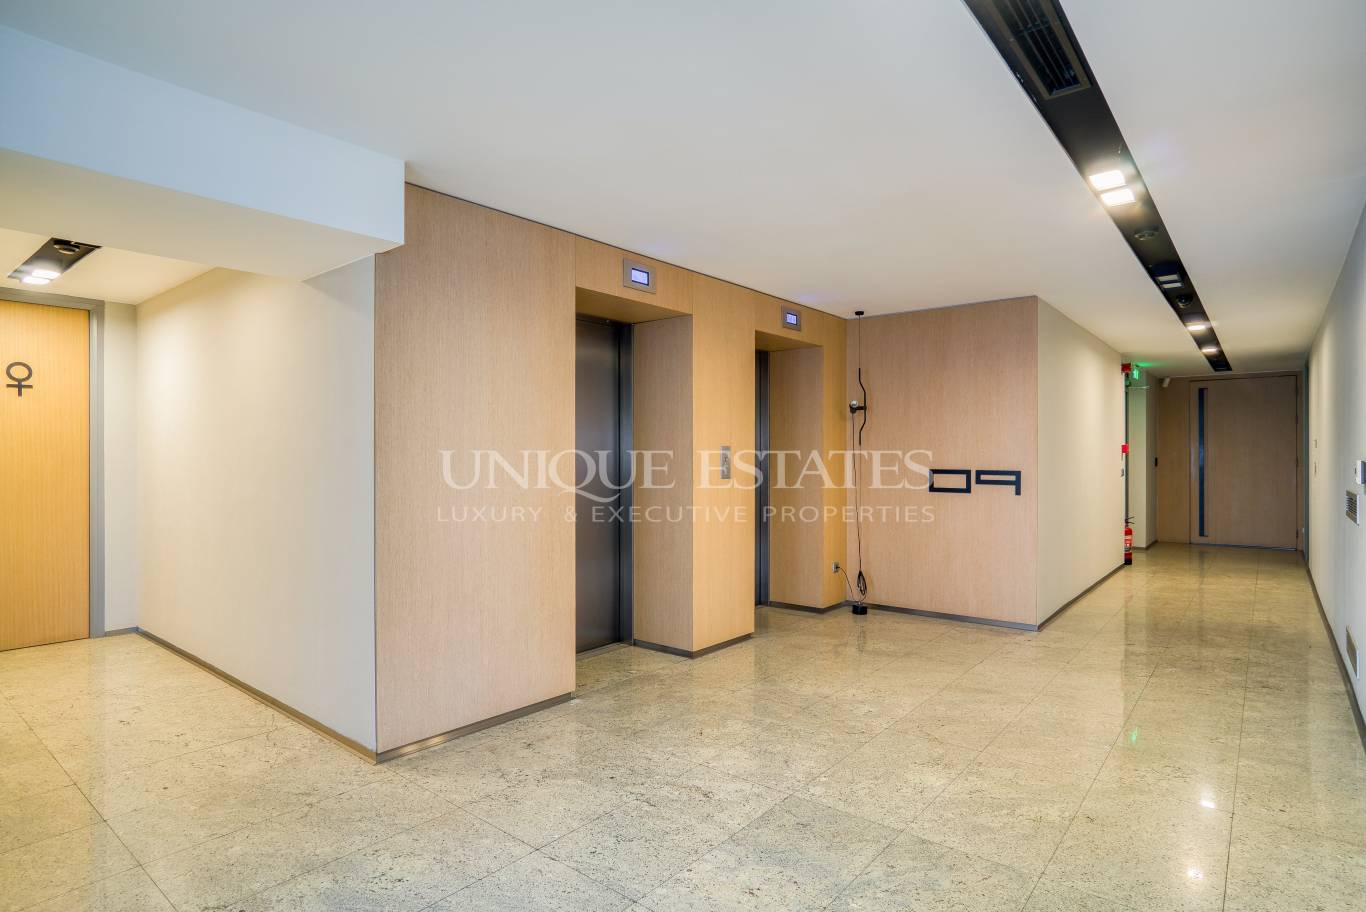 Office for rent in Sofia, Bulgaria Blvd with listing ID: K12488 - image 1